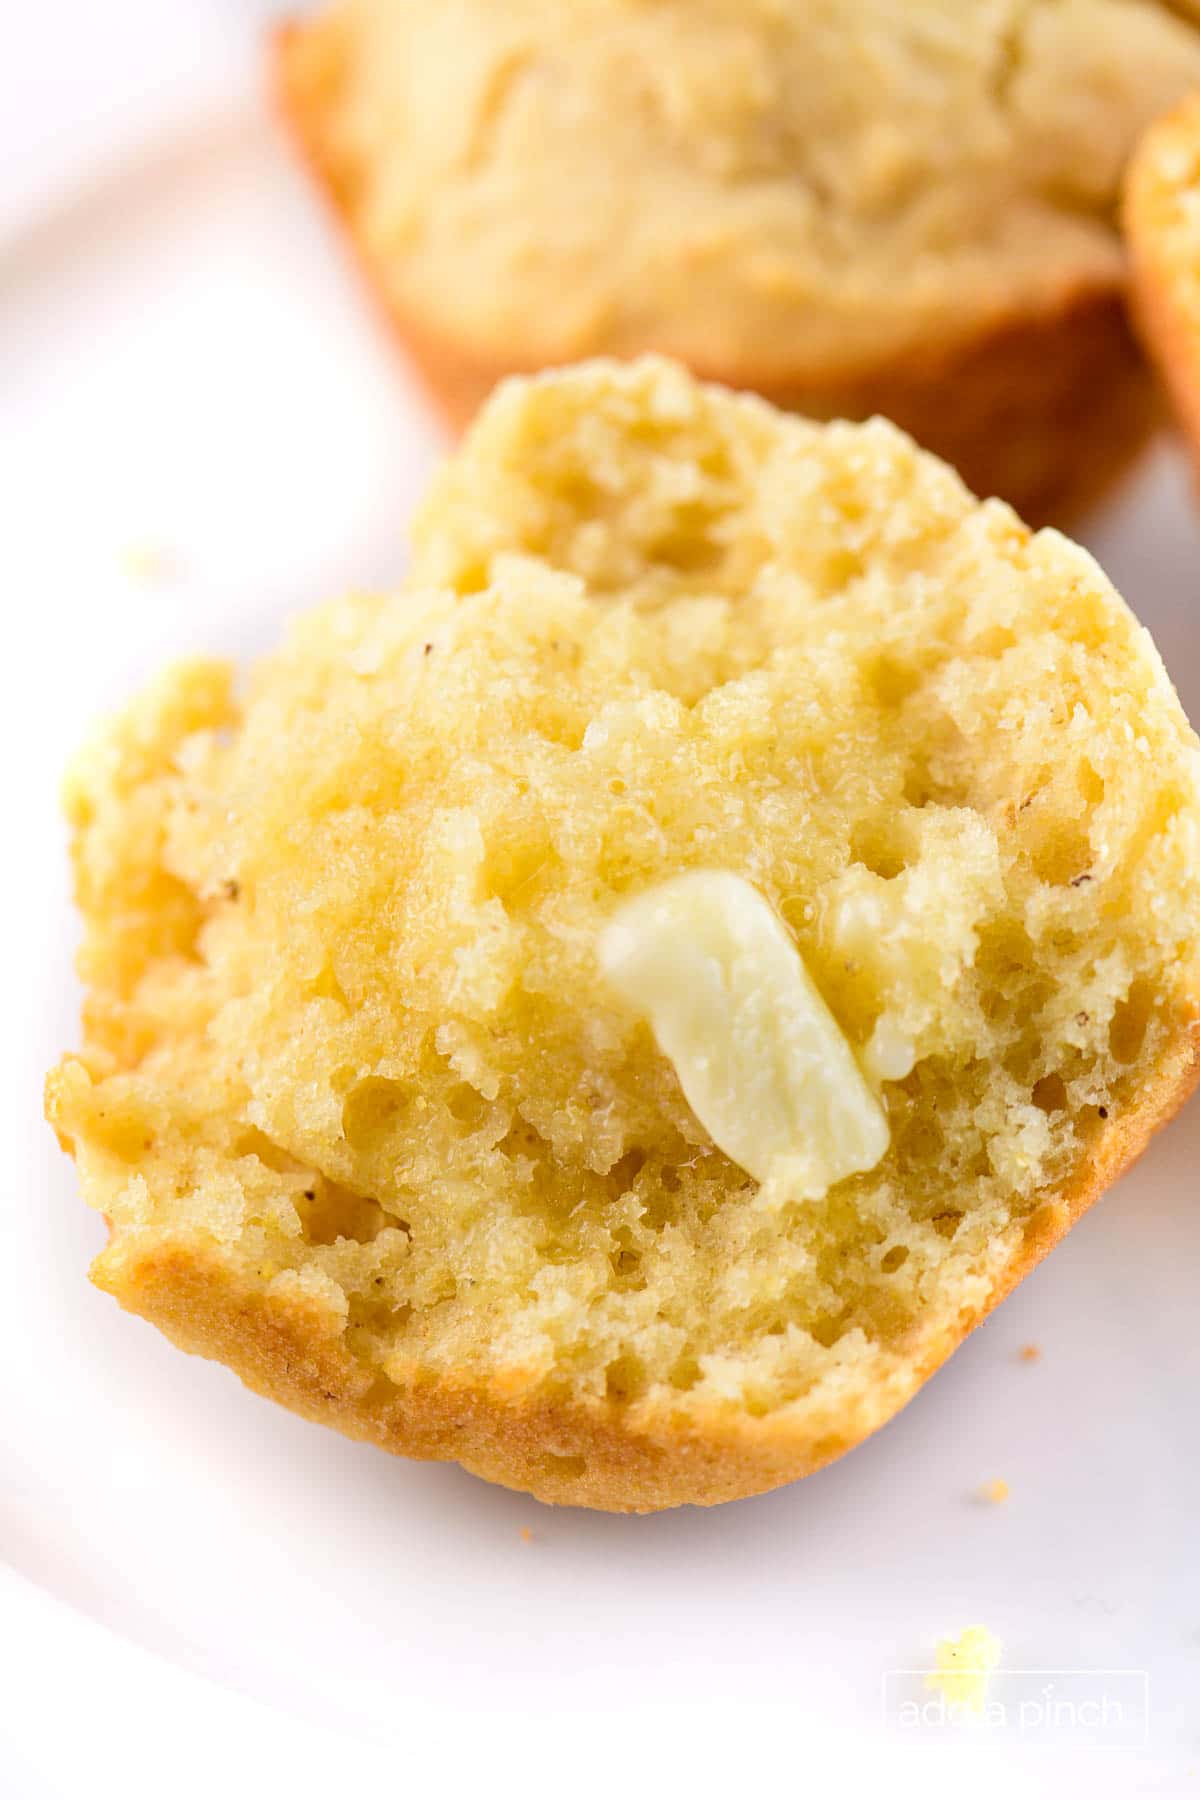 Photograph of cornbread muffin with a pat of butter.